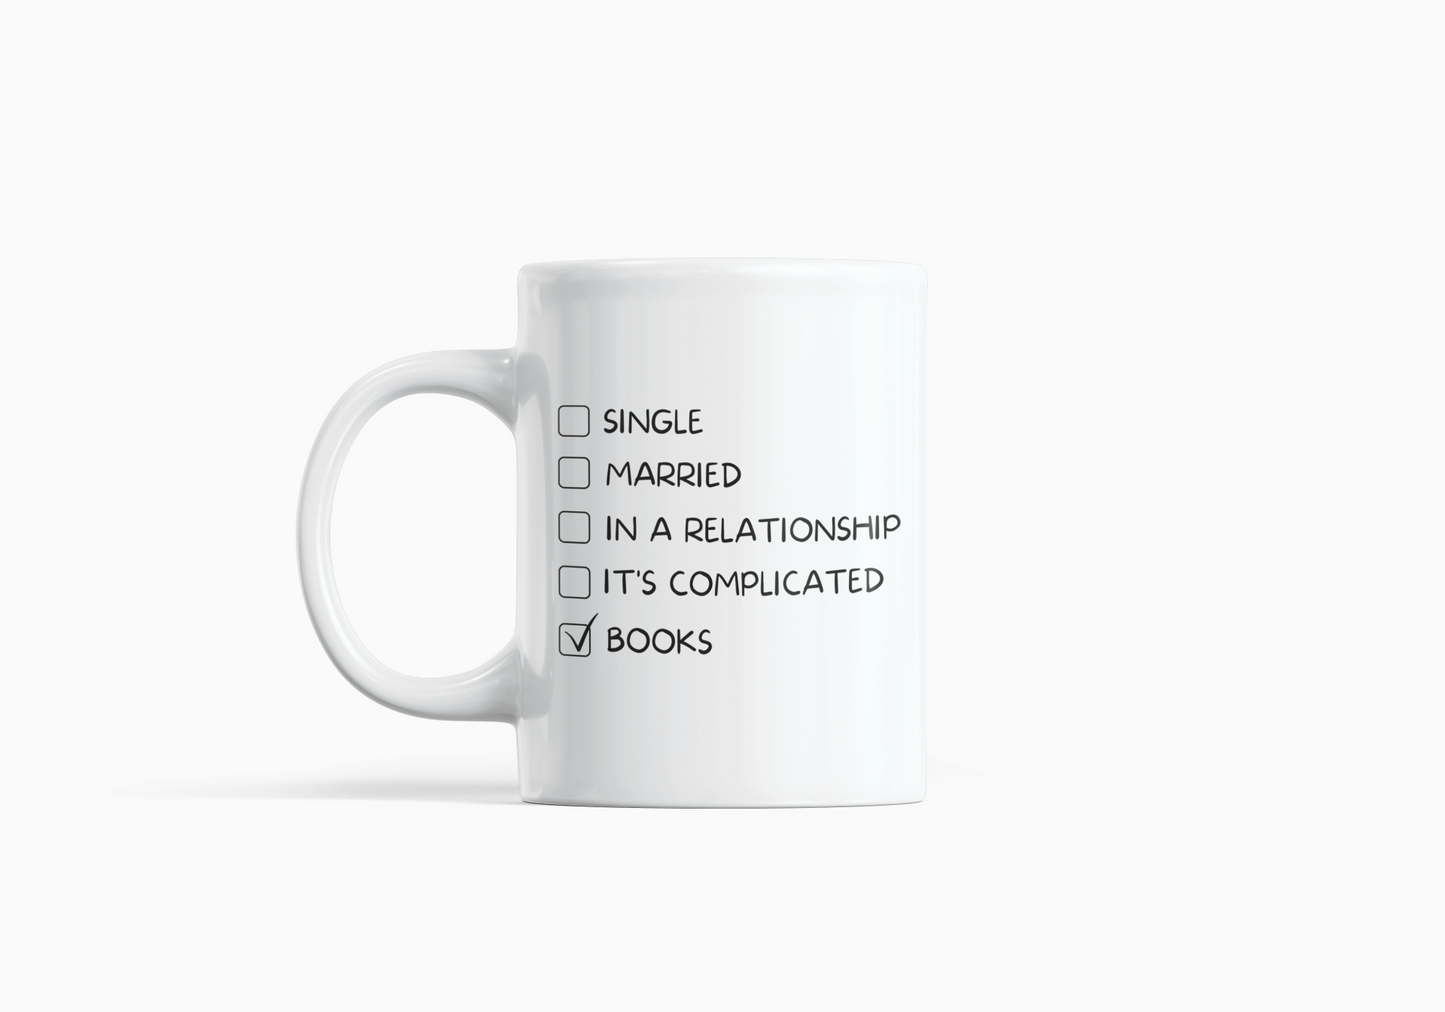 Single, married, in a relationship, books: Coffee Mug White